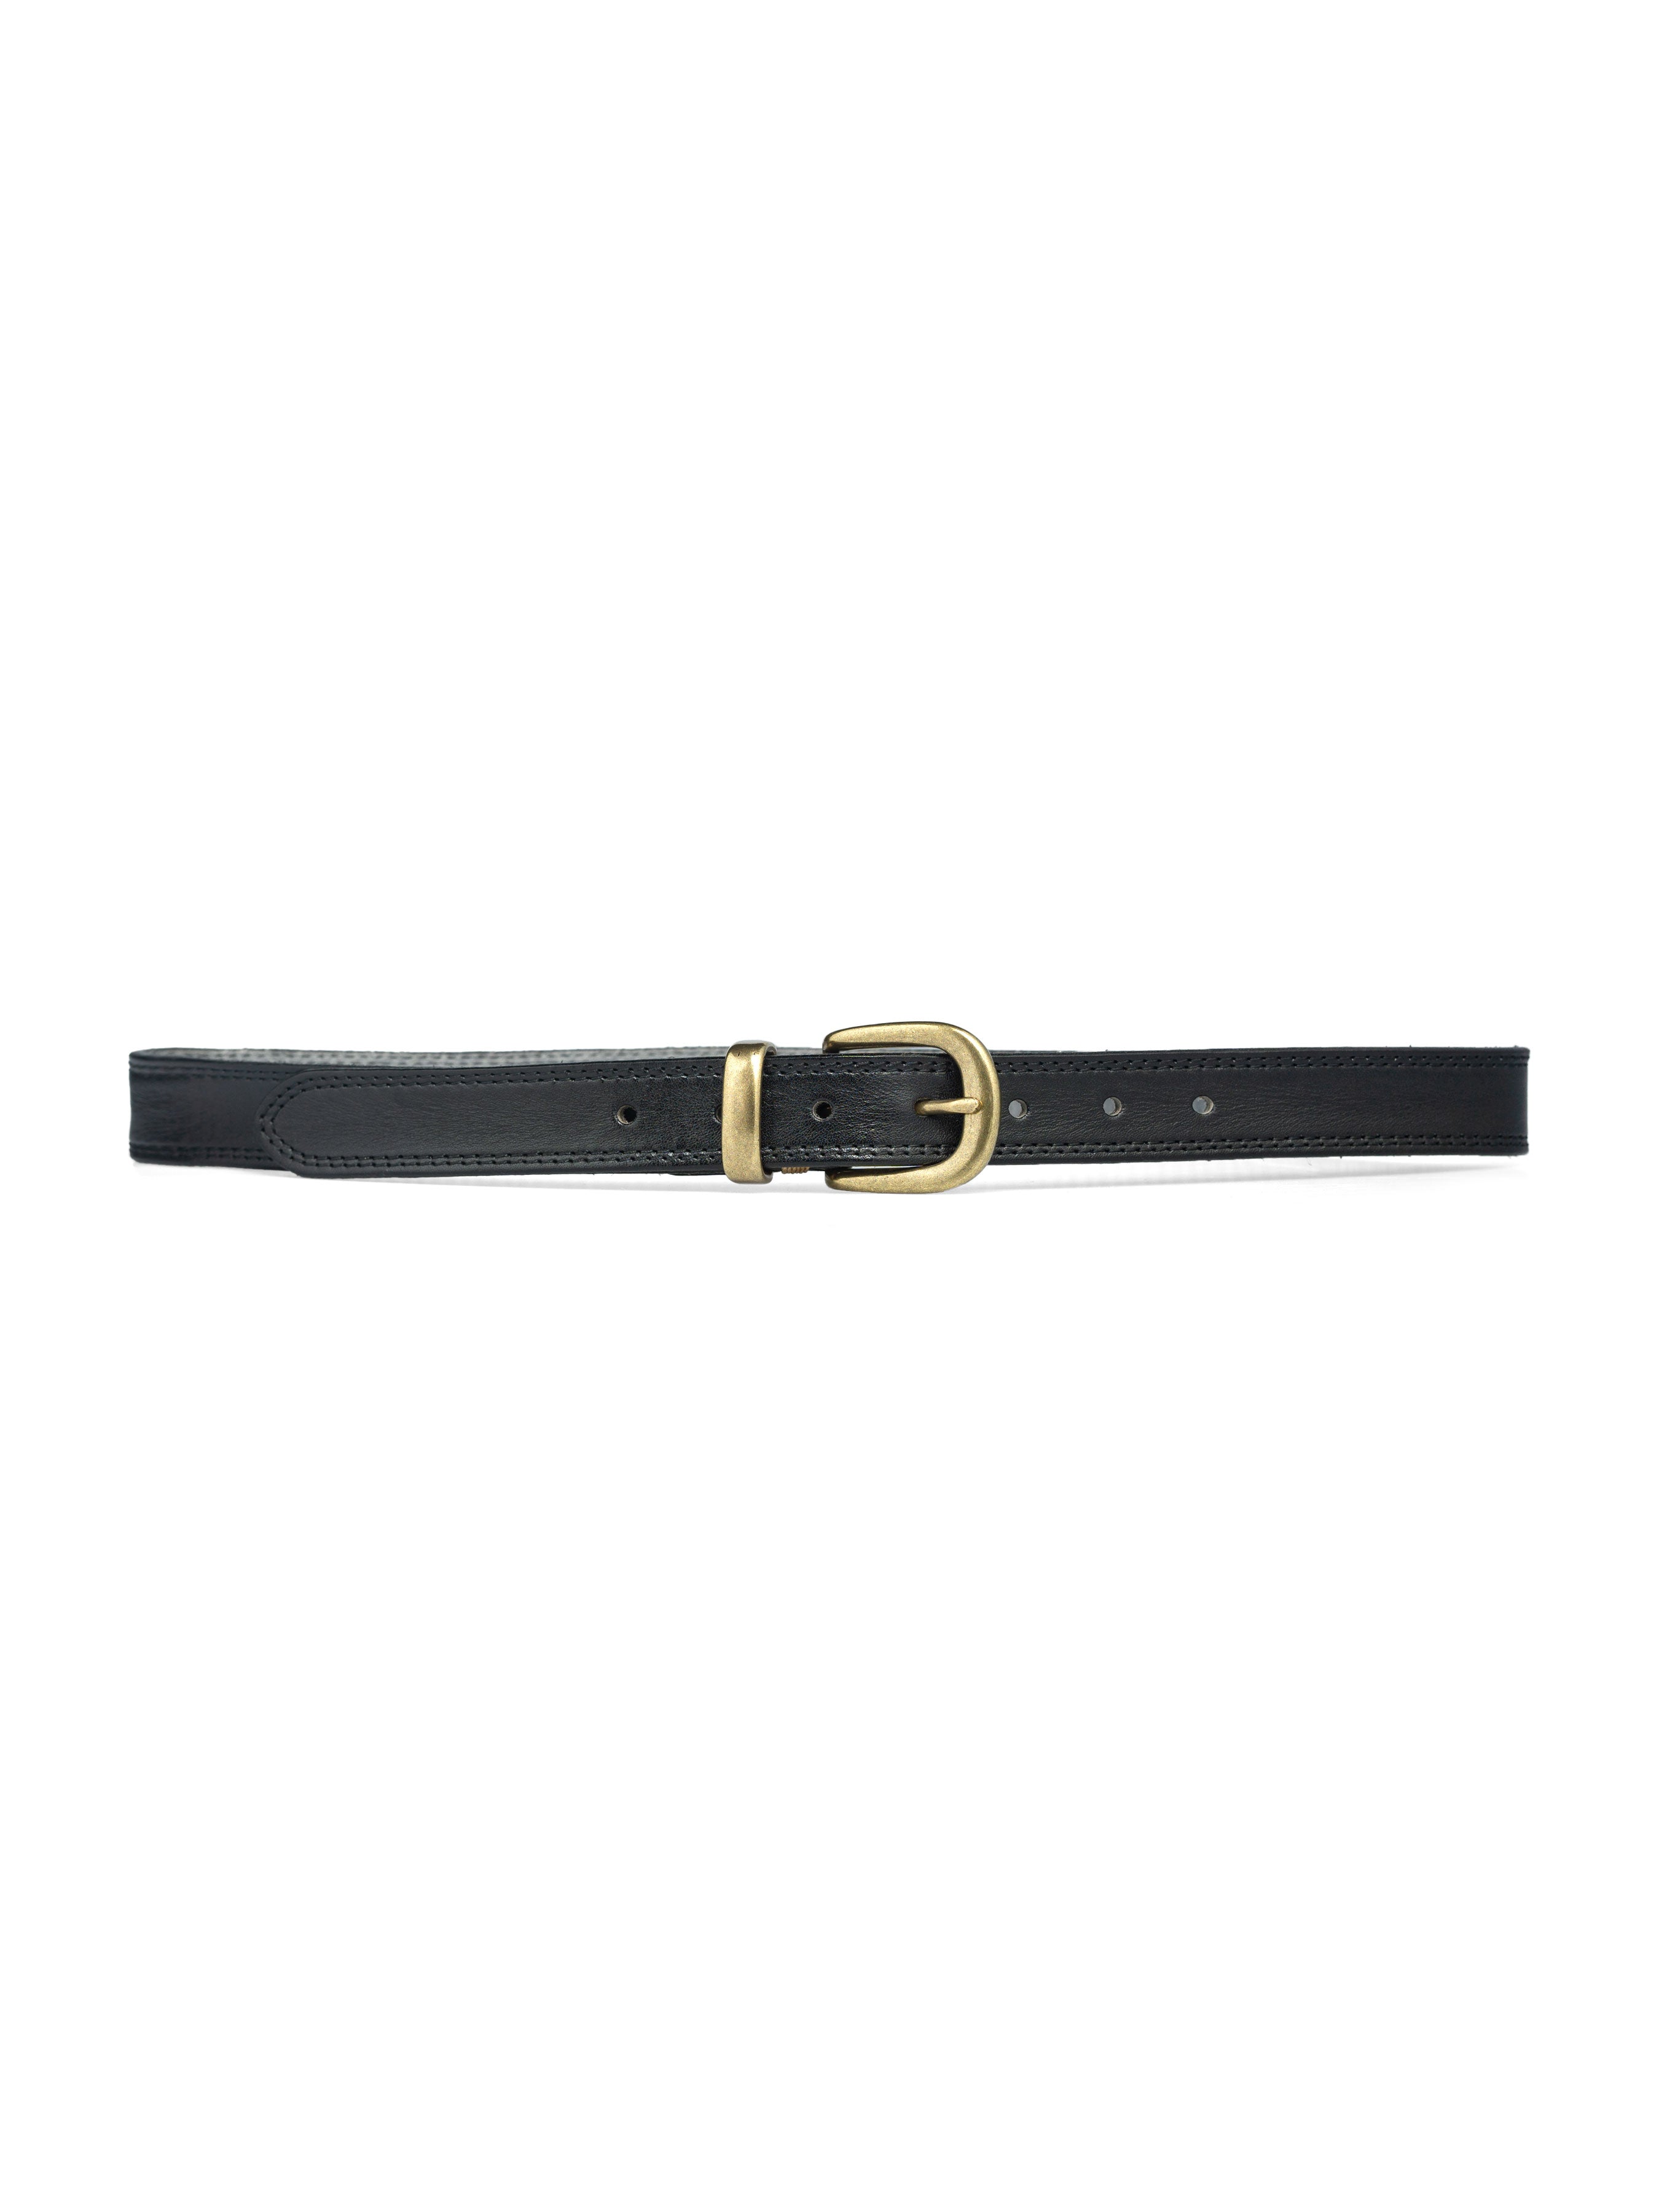 Leather Belt with Horseshoe Gold - Toned Buckle with Stitching - Zeve Shoes